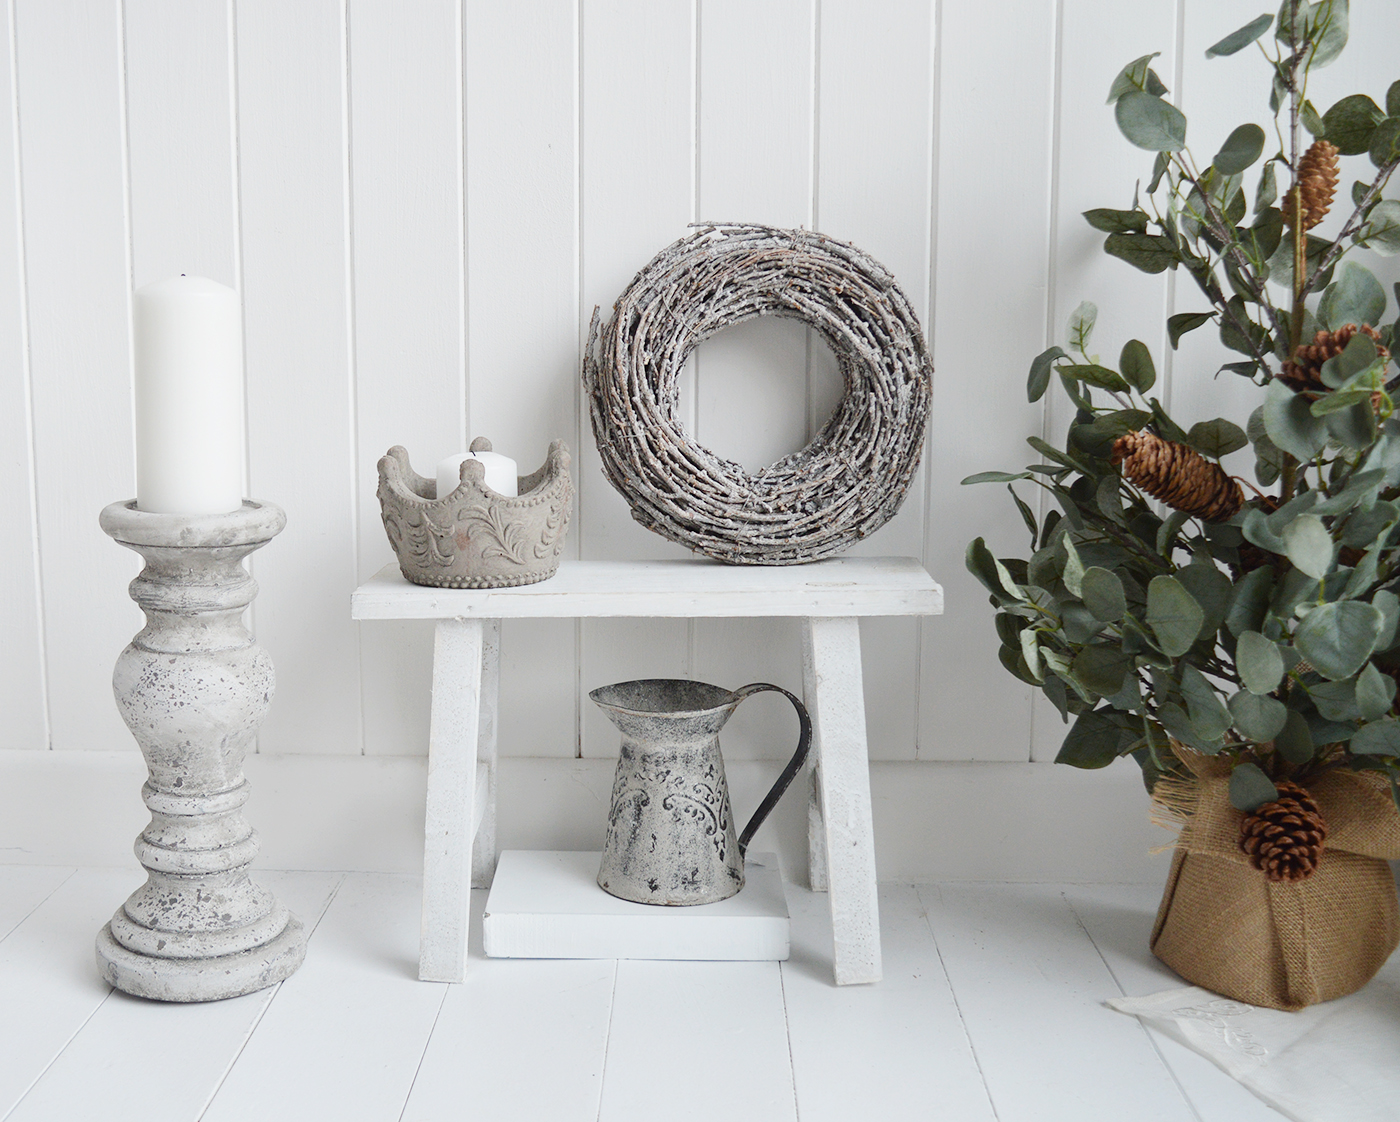 Grey Willow Wreath for a traditional New England look to your room from The White Lighthouse Furniture for the hallway, living room, bedroom and bathroom